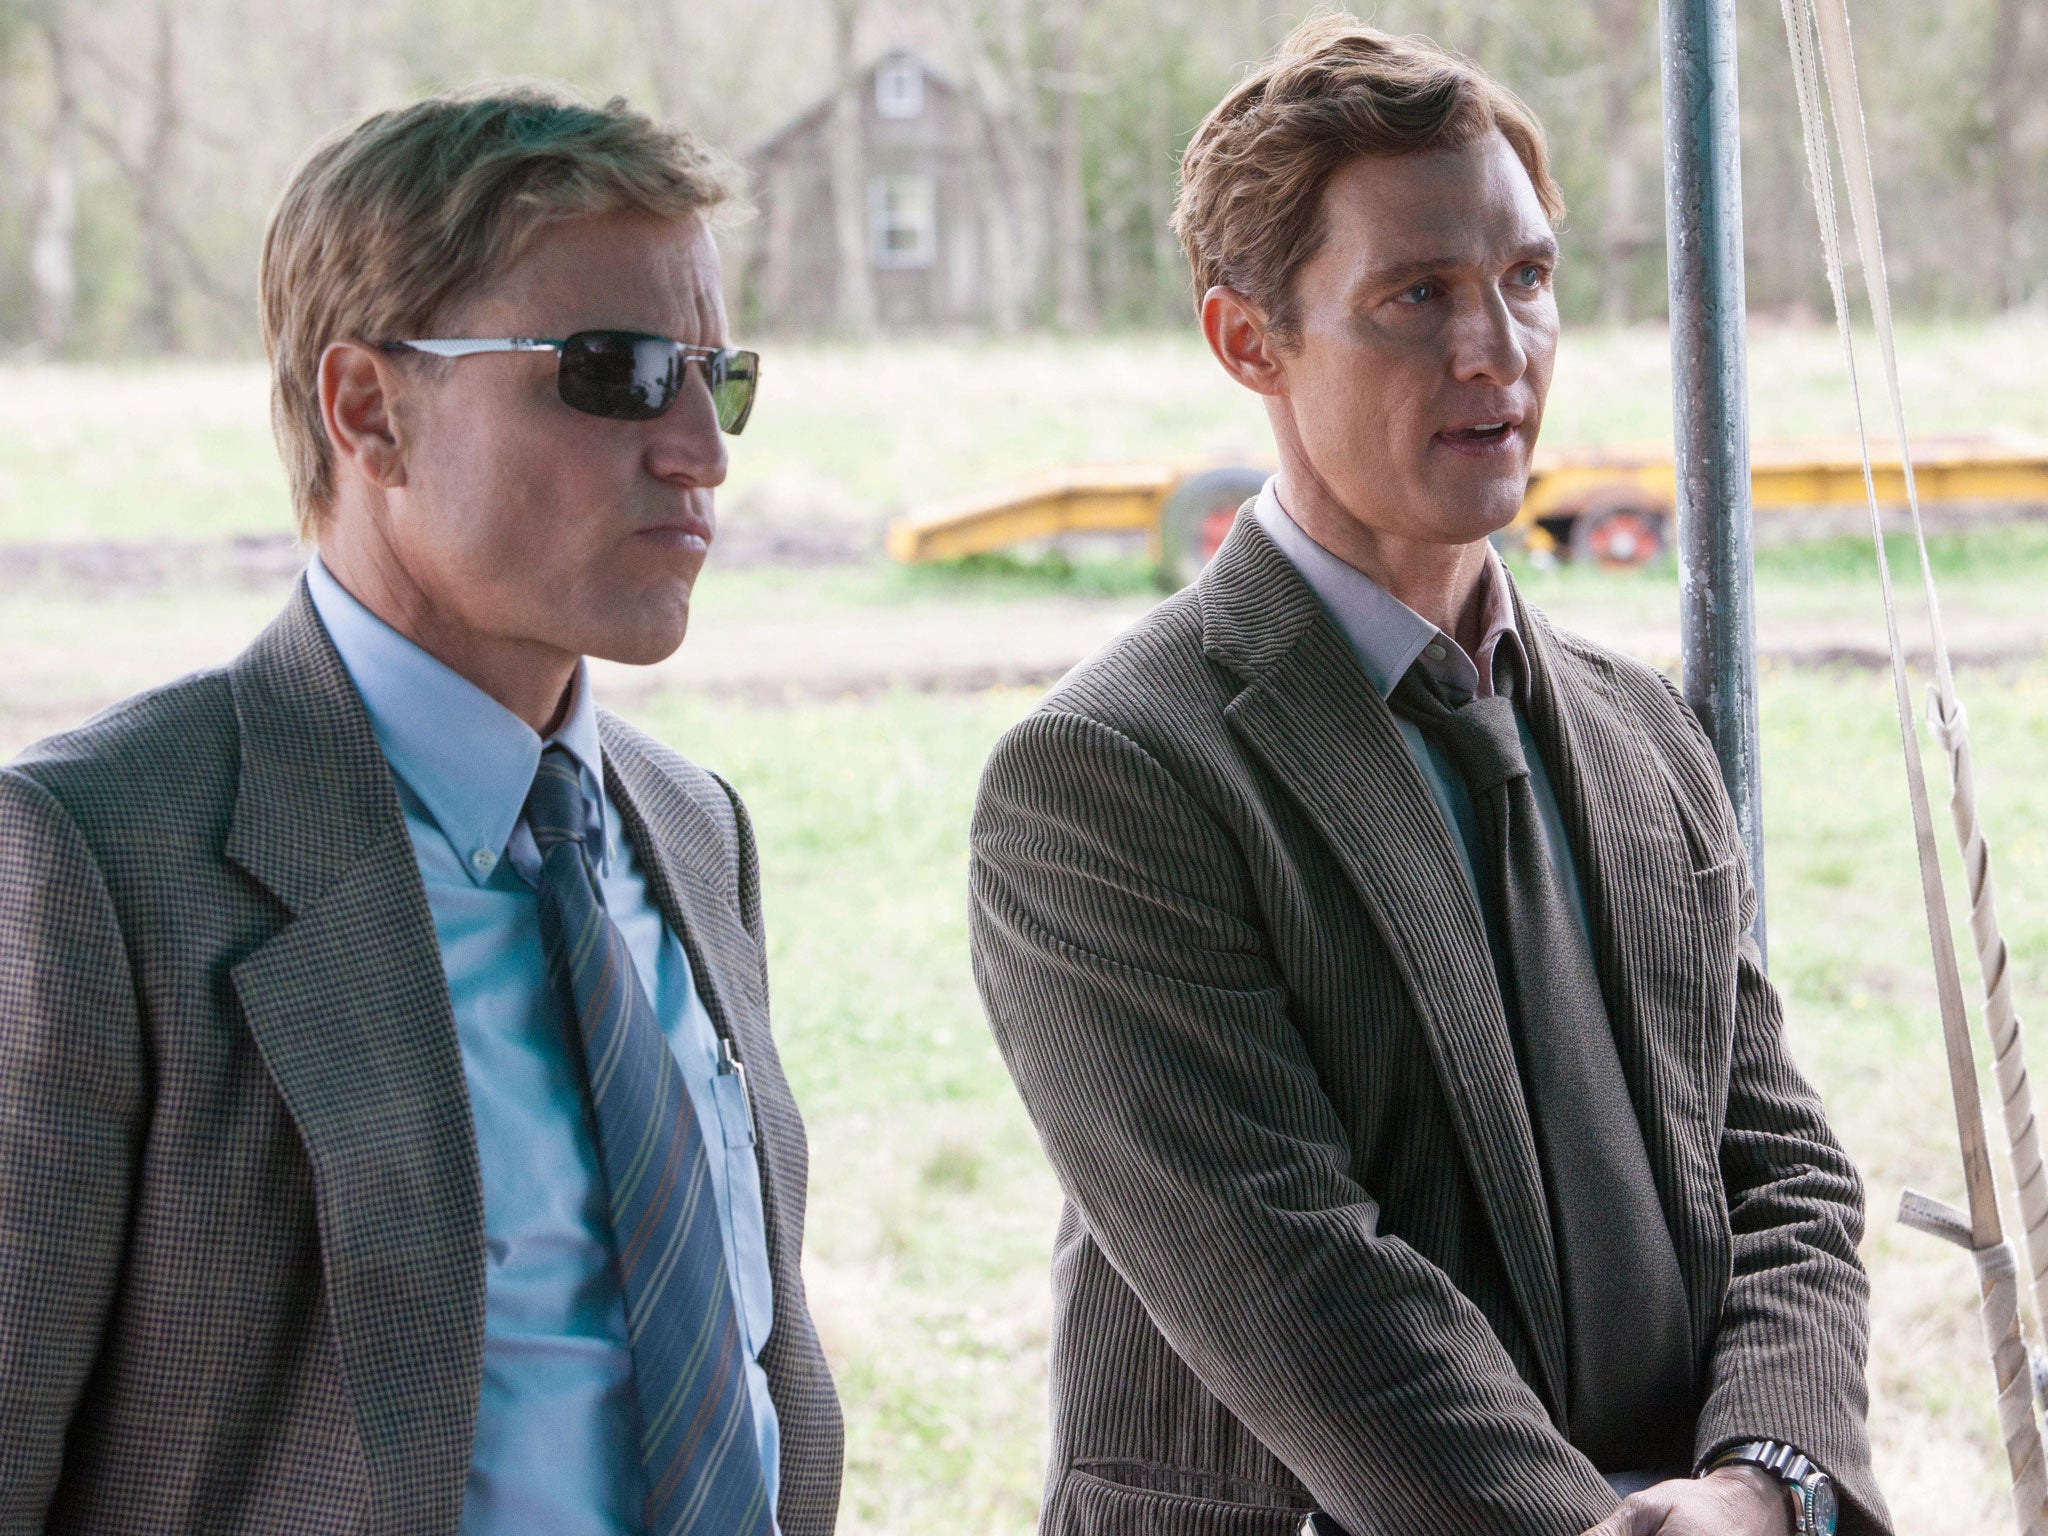 Woody Harrelson and Matthew McConaughey as Martin Hart and Rustin Cohle